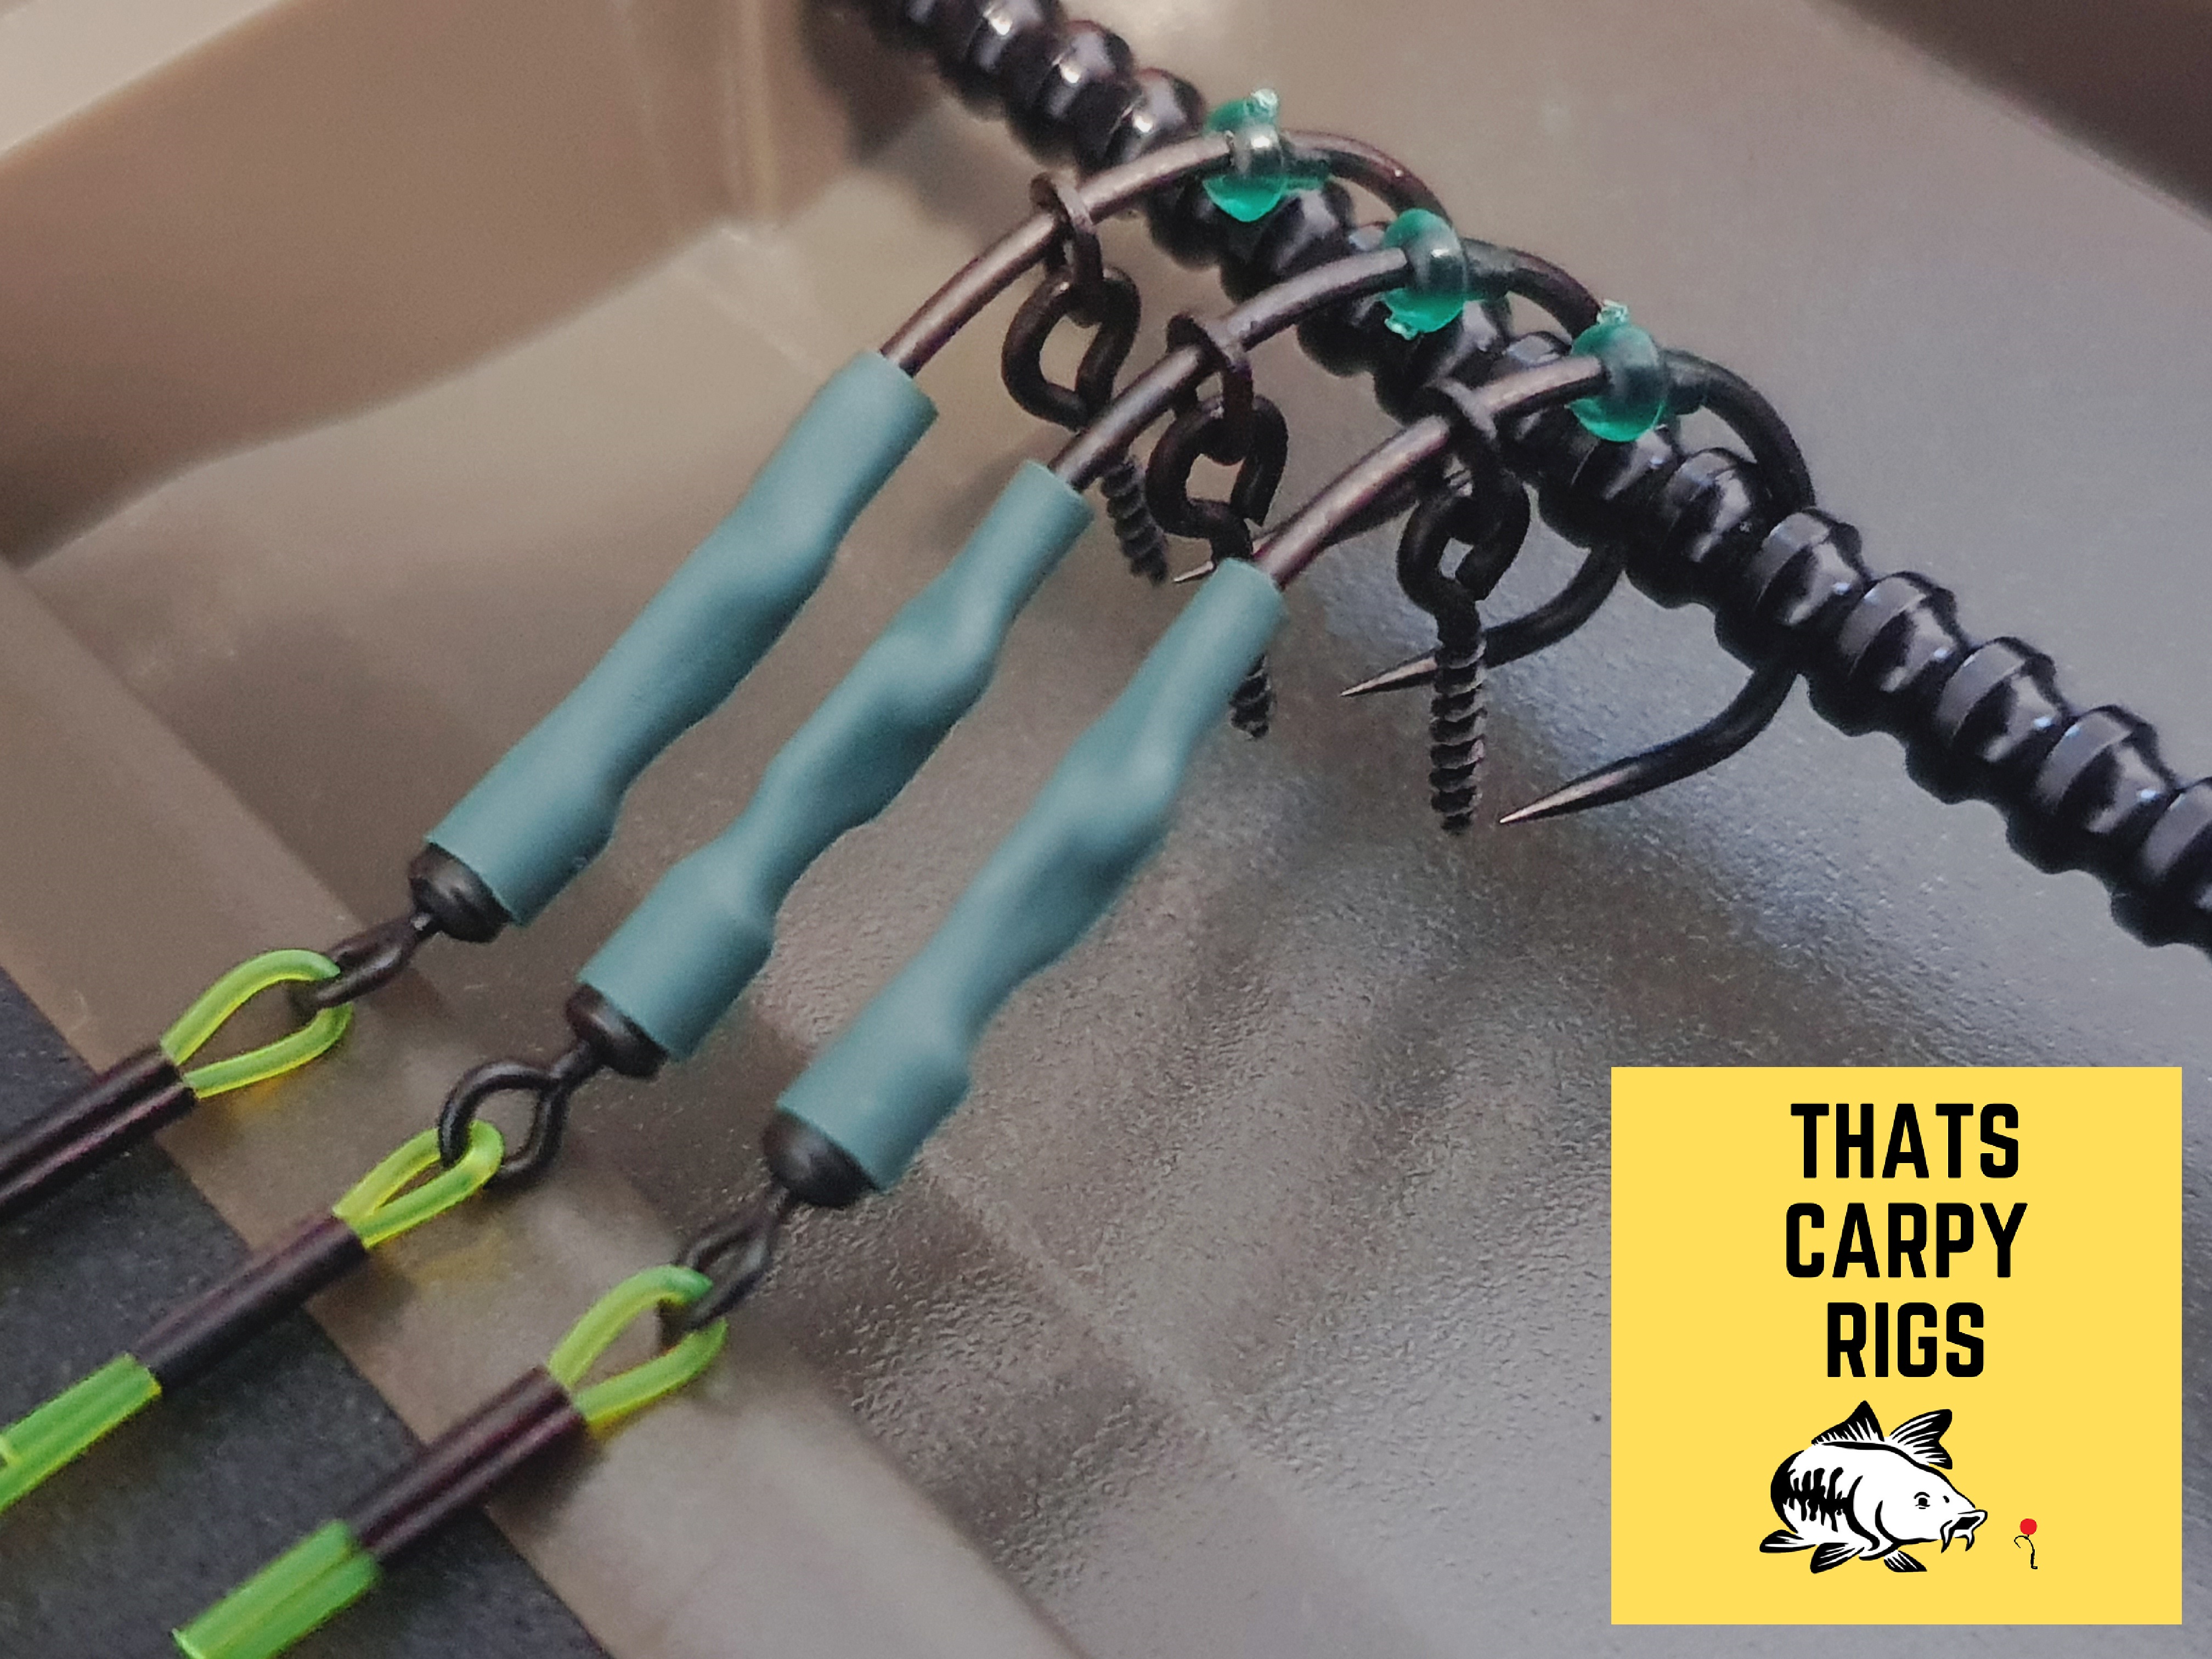 Weed Spinner Rigs - Professionally Tied Carp Rigs